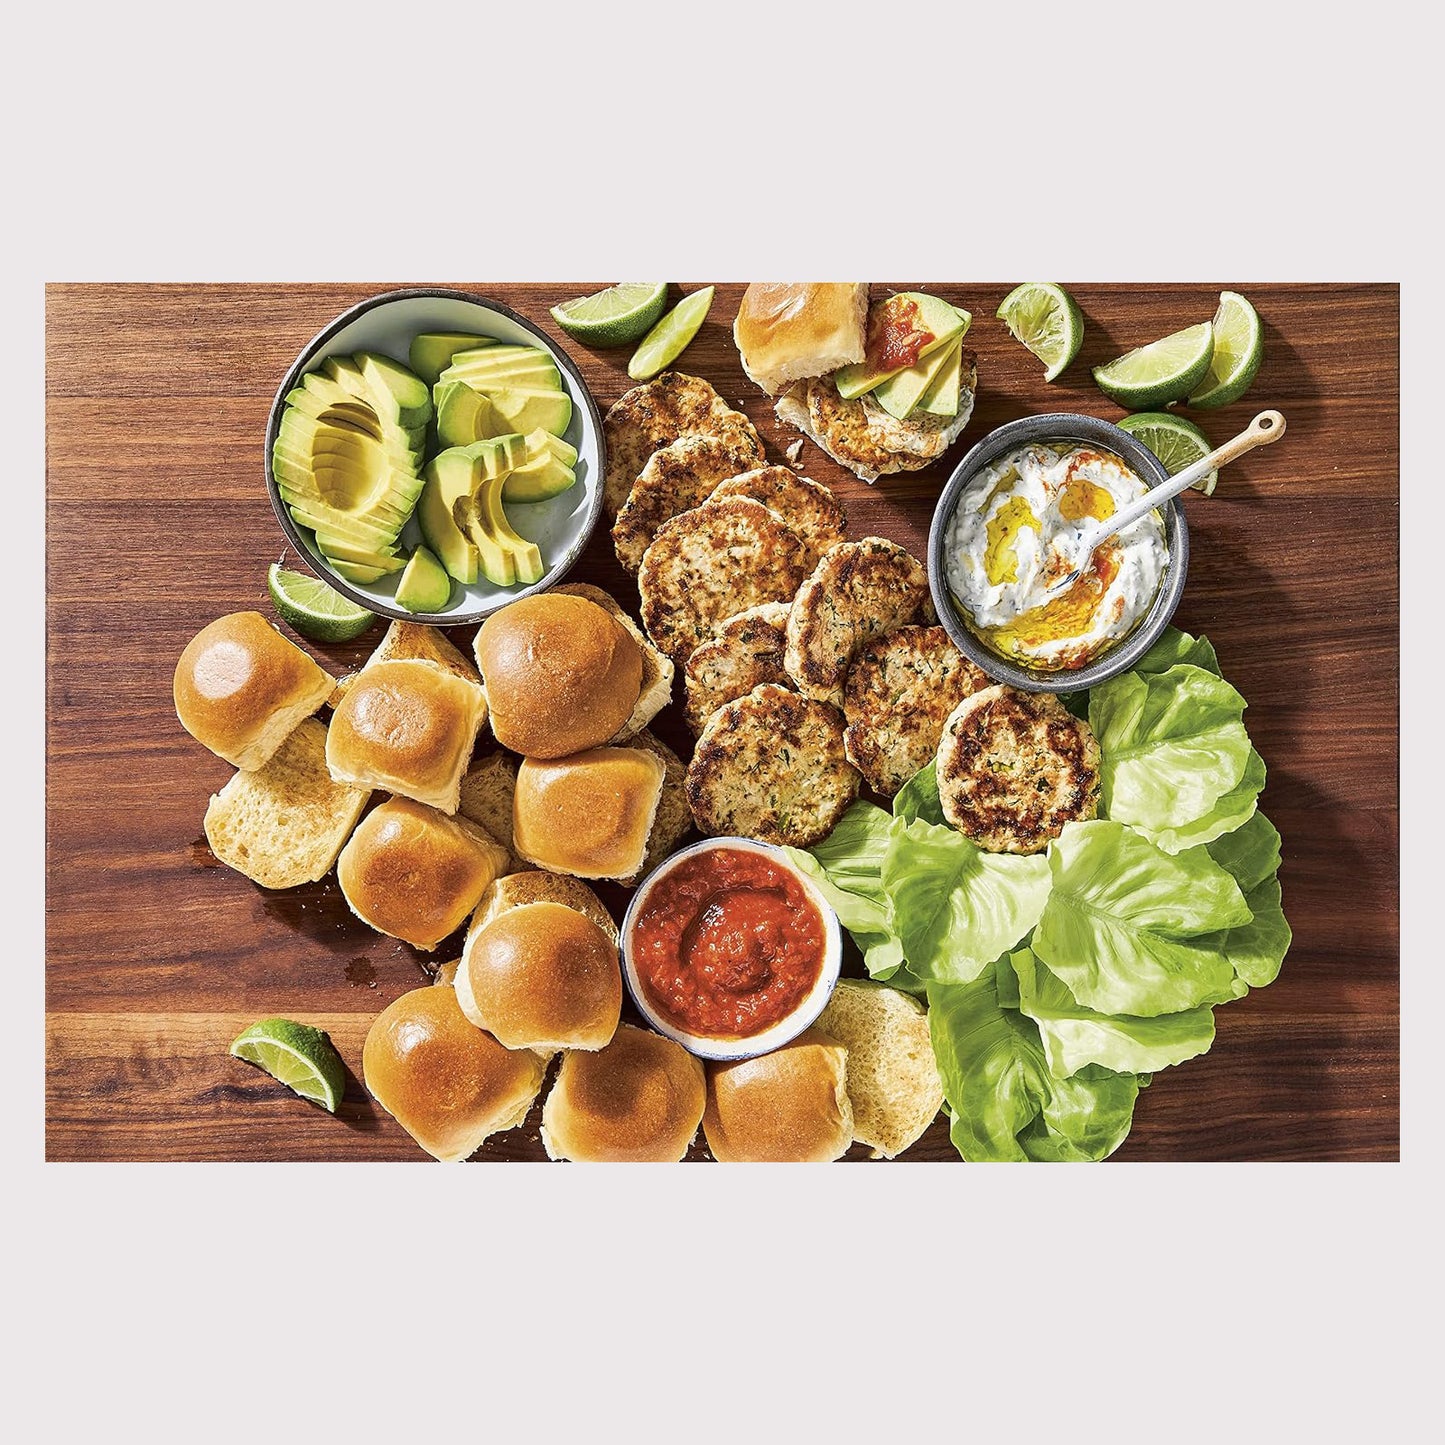 Boards and Spreads: Shareable, Simple Arrangements for Every Meal